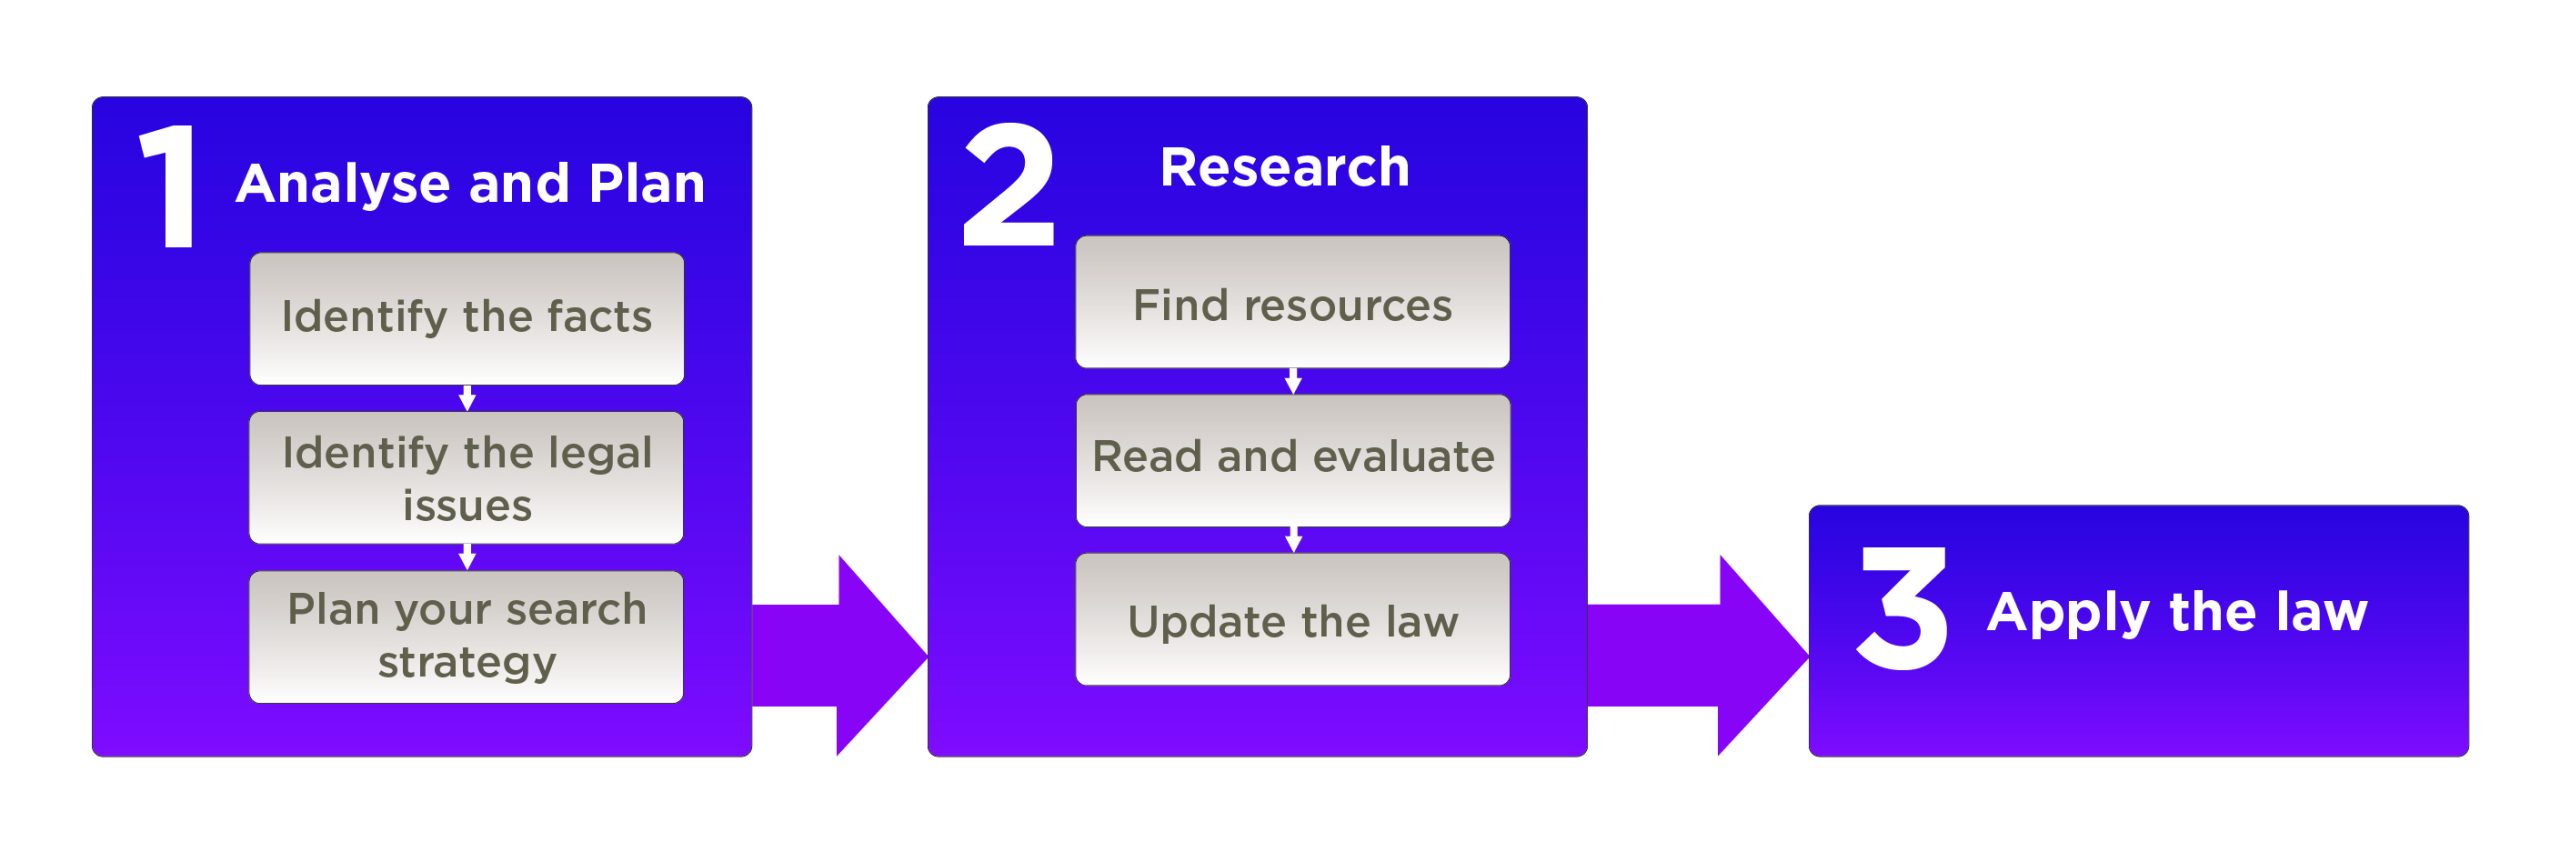 A diagram with arrows moving forwards through three consecutive stages. Stage one is the Analyse and Plan stage for identifying facts and legal issues. Stage two is the research stage for finding and evaluating resources. Stage three relates to applying the law.